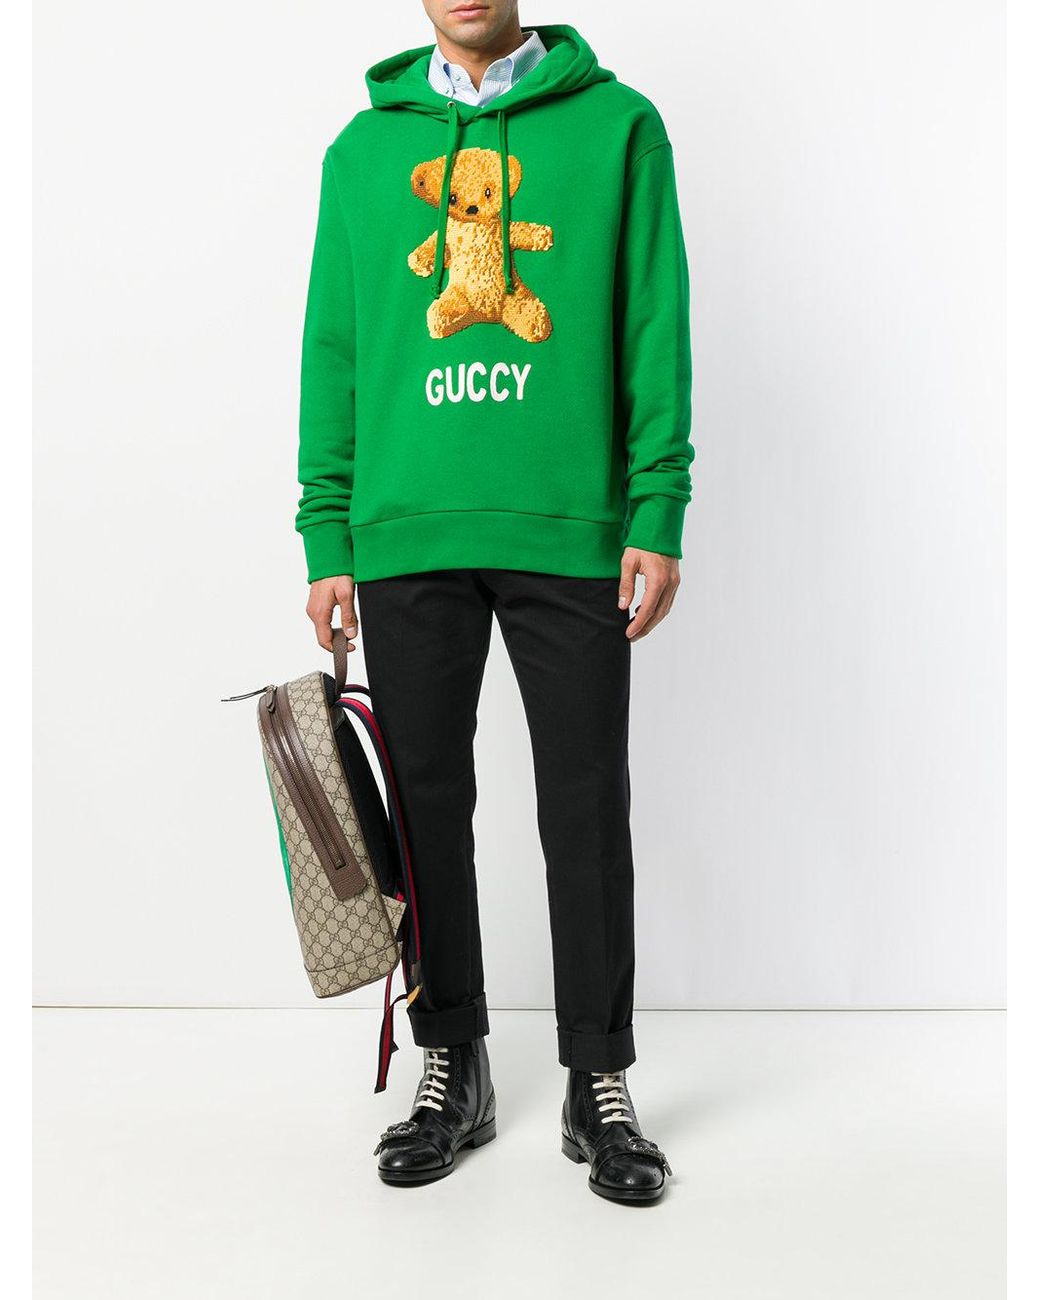 Gucci Embroidedered Teddy Bear Hoodie in Green for Men | Lyst